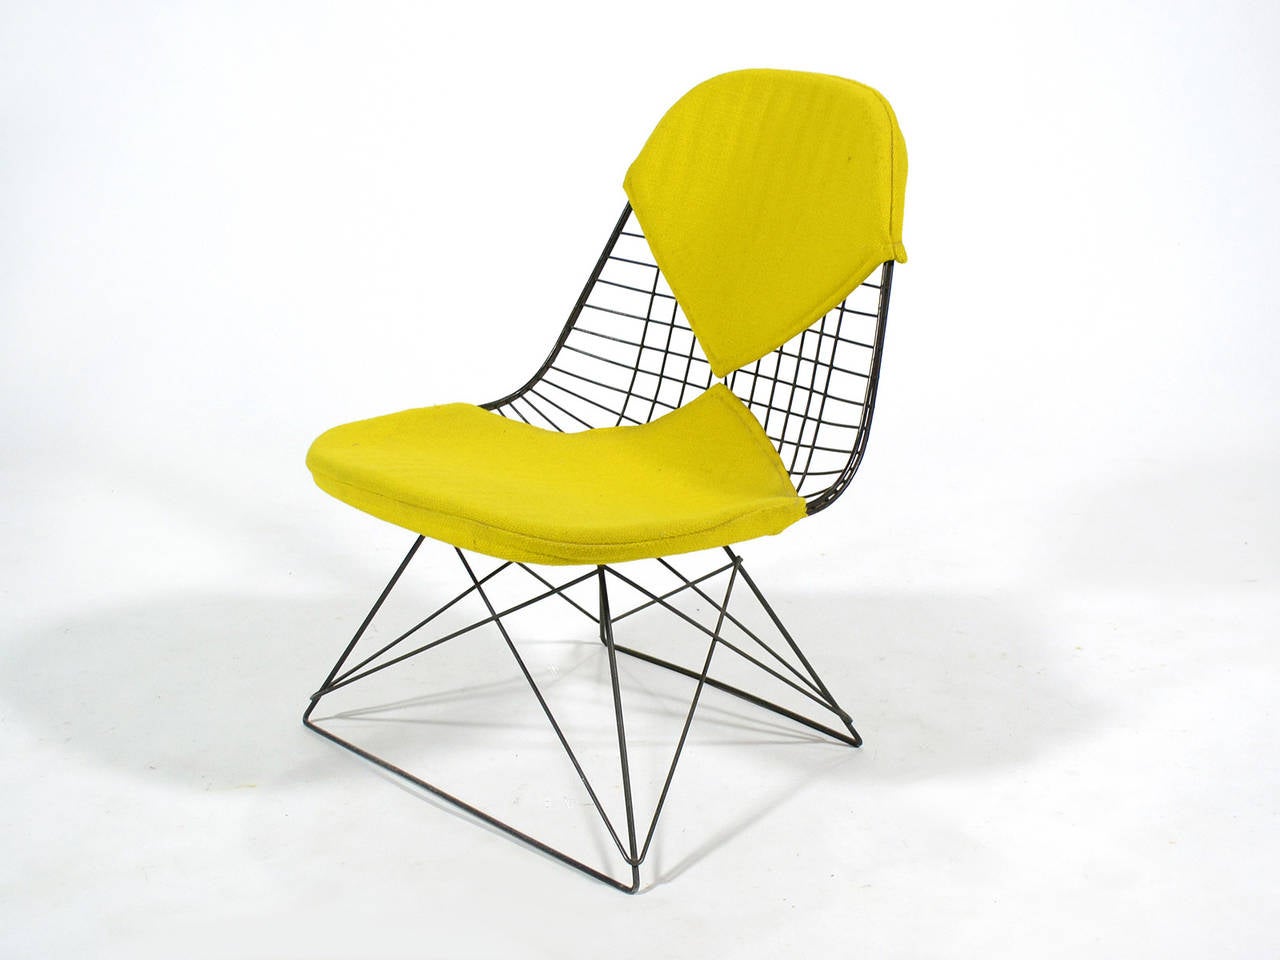 A real collector's piece, this early Eames LKR-2 wire lounge chair has a cat's cradle base and bikini pad upholstered in yellow Alexander Girard hopsack fabric. The jute backing on the seat pad dates the chair from between 1951 and 1957.
Entirely